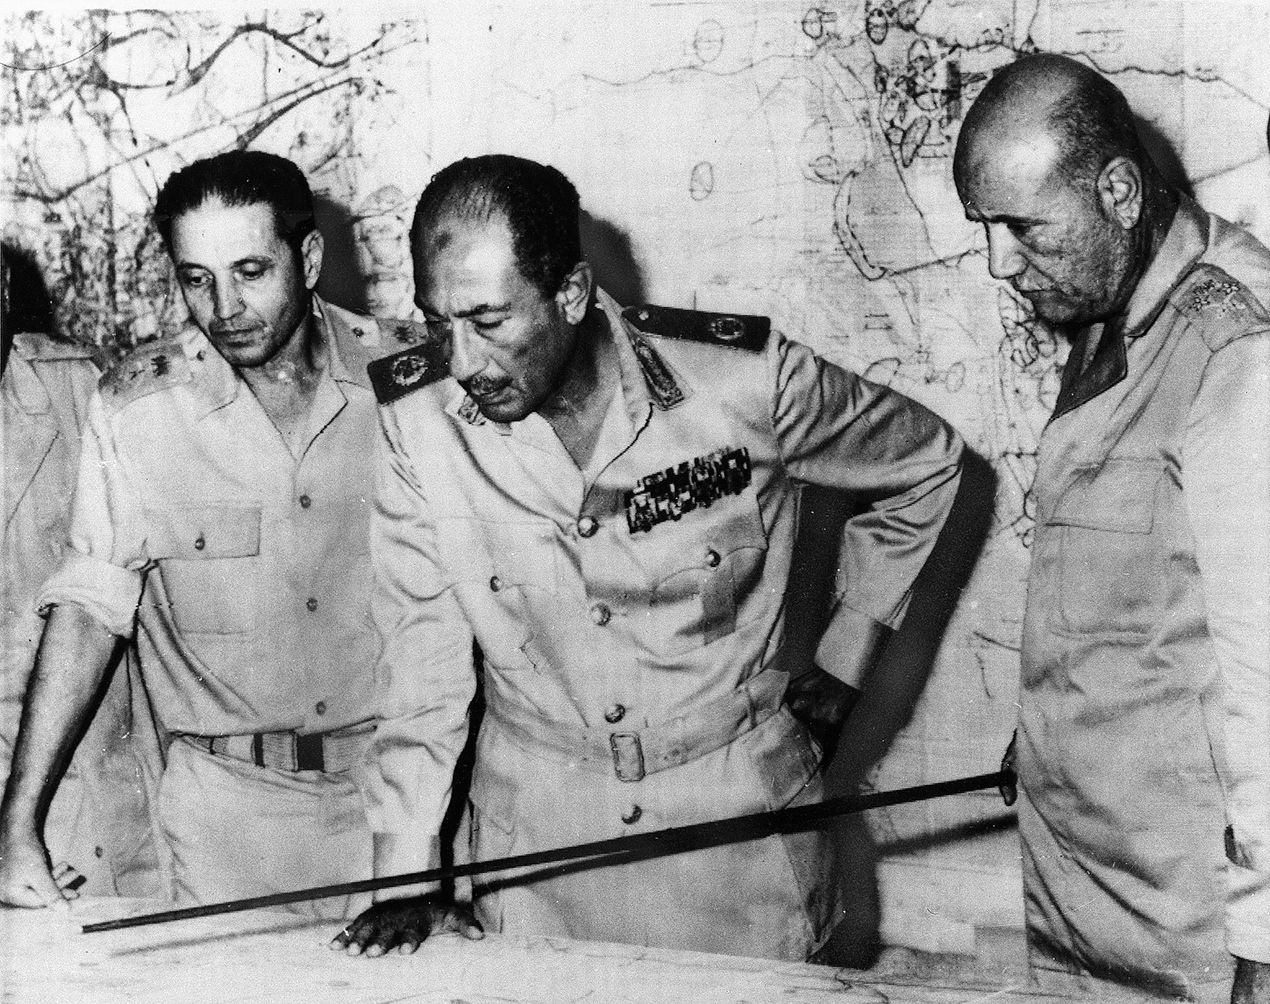 Egyptian President Anwar al-Sadat, right, looks at a situation map during fighting in the Sinai. Syrian president Hafez Al-Assad asked Sadat to attack Israel in the south to draw attention away from the Golan Heights, where Israeli forces had repelled his attack and invaded Syria. The Egyptian attack on the Sinai was also repelled.